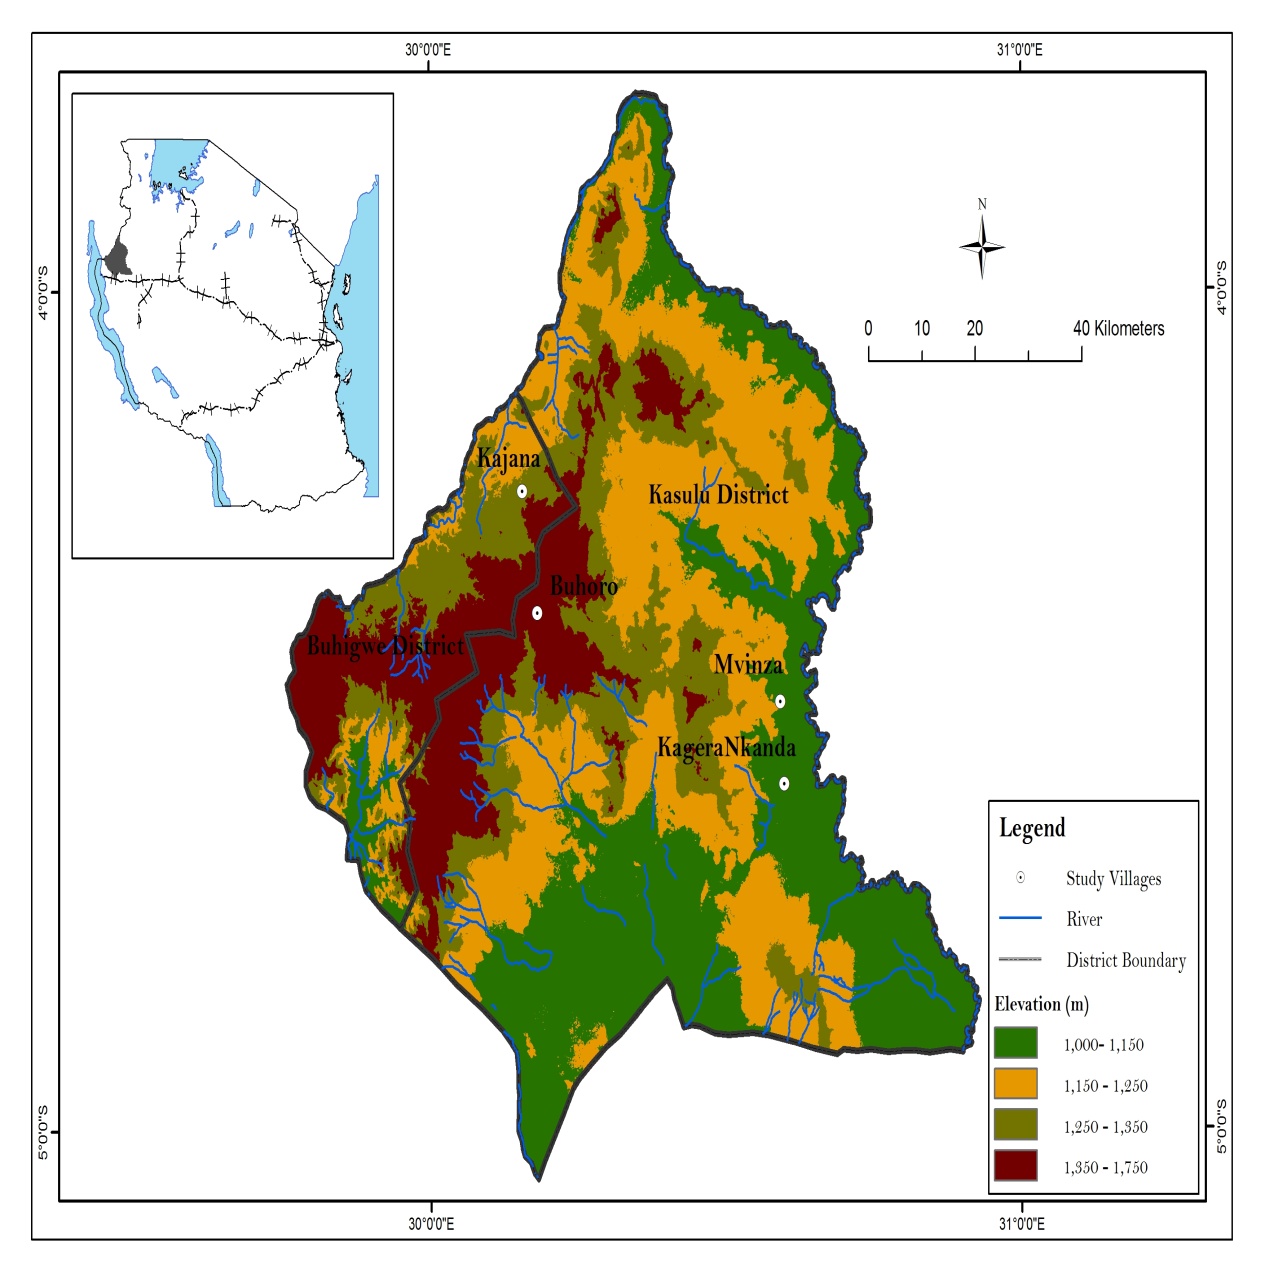 Analysis of Spatial Variation of Vulnerability to Climate Change and Variability in Kigoma Region, Western Tanzania